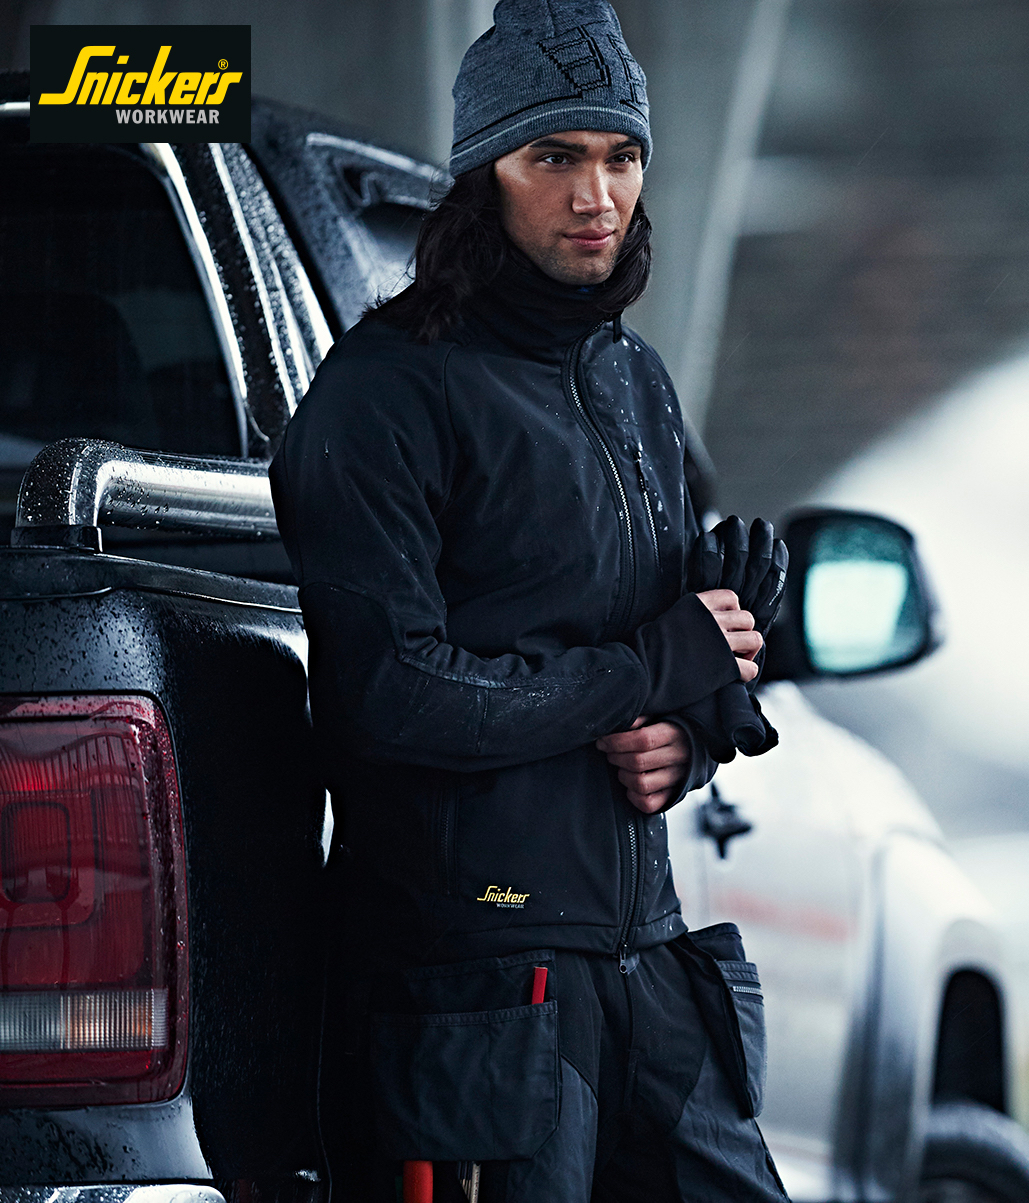 Dress For Windy Weather with Snickers Workwear’s GORE® WINDSTOPPER® Jackets @SnickersWw_UK